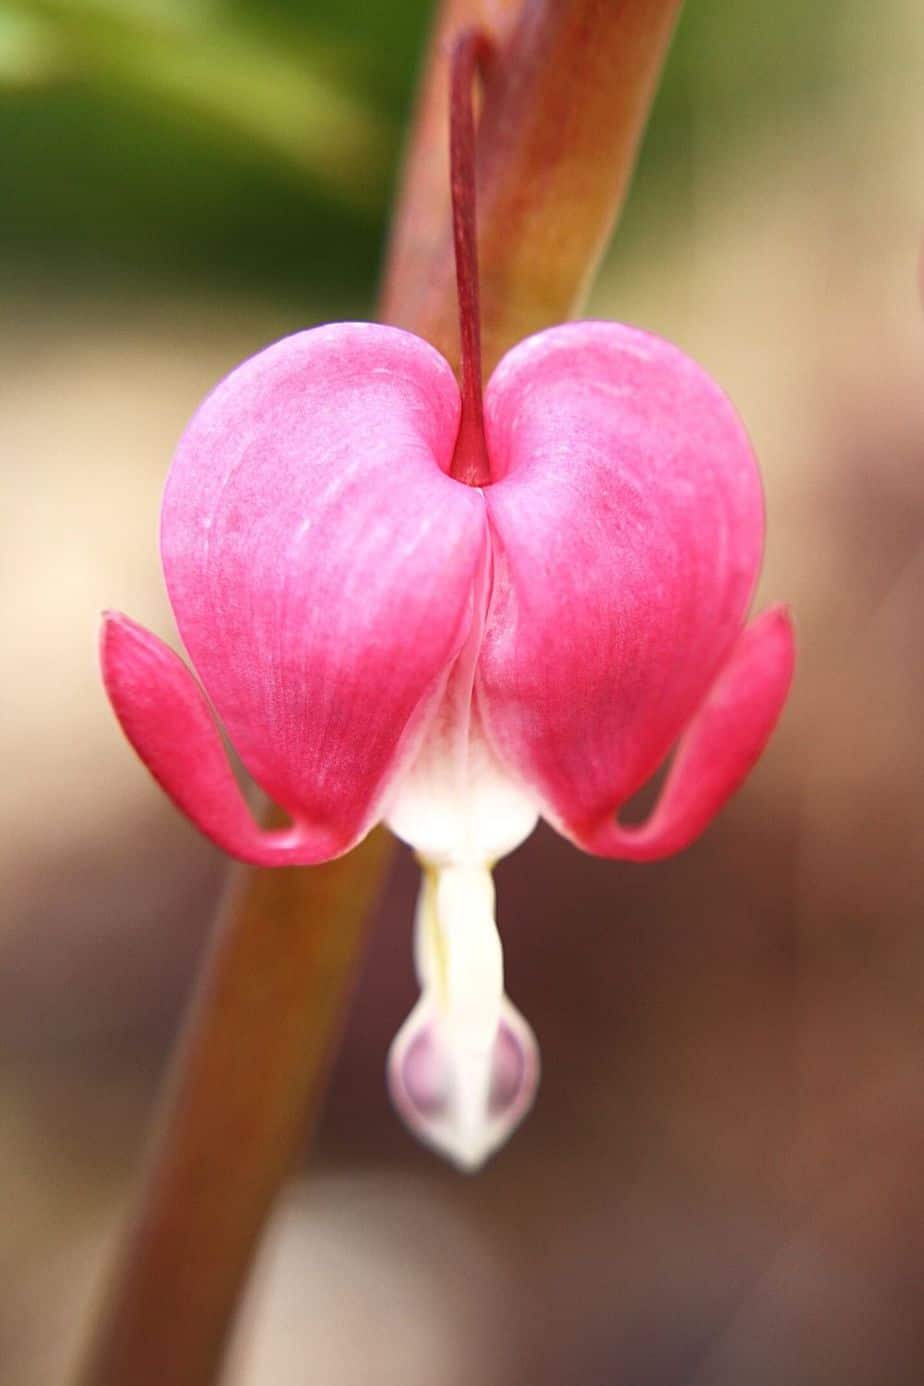 Bleeding Heart, known for its heart-shaped and pillow-like flowers, can be grown on your east-facing balcony 